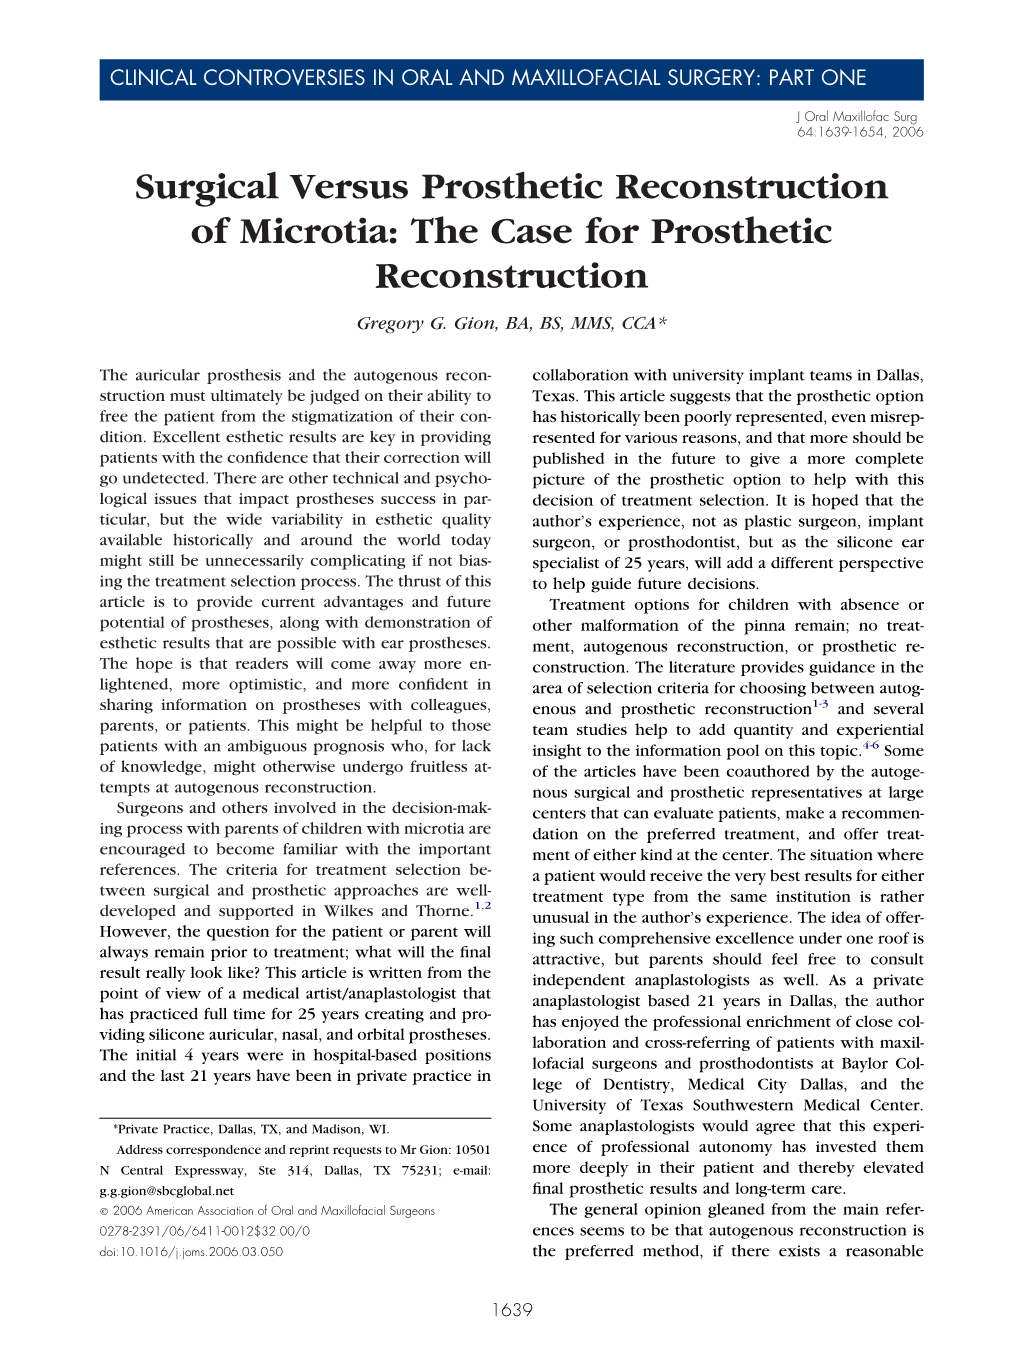 Surgical Versus Prosthetic Reconstruction of Microtia: the Case for Prosthetic Reconstruction Gregory G